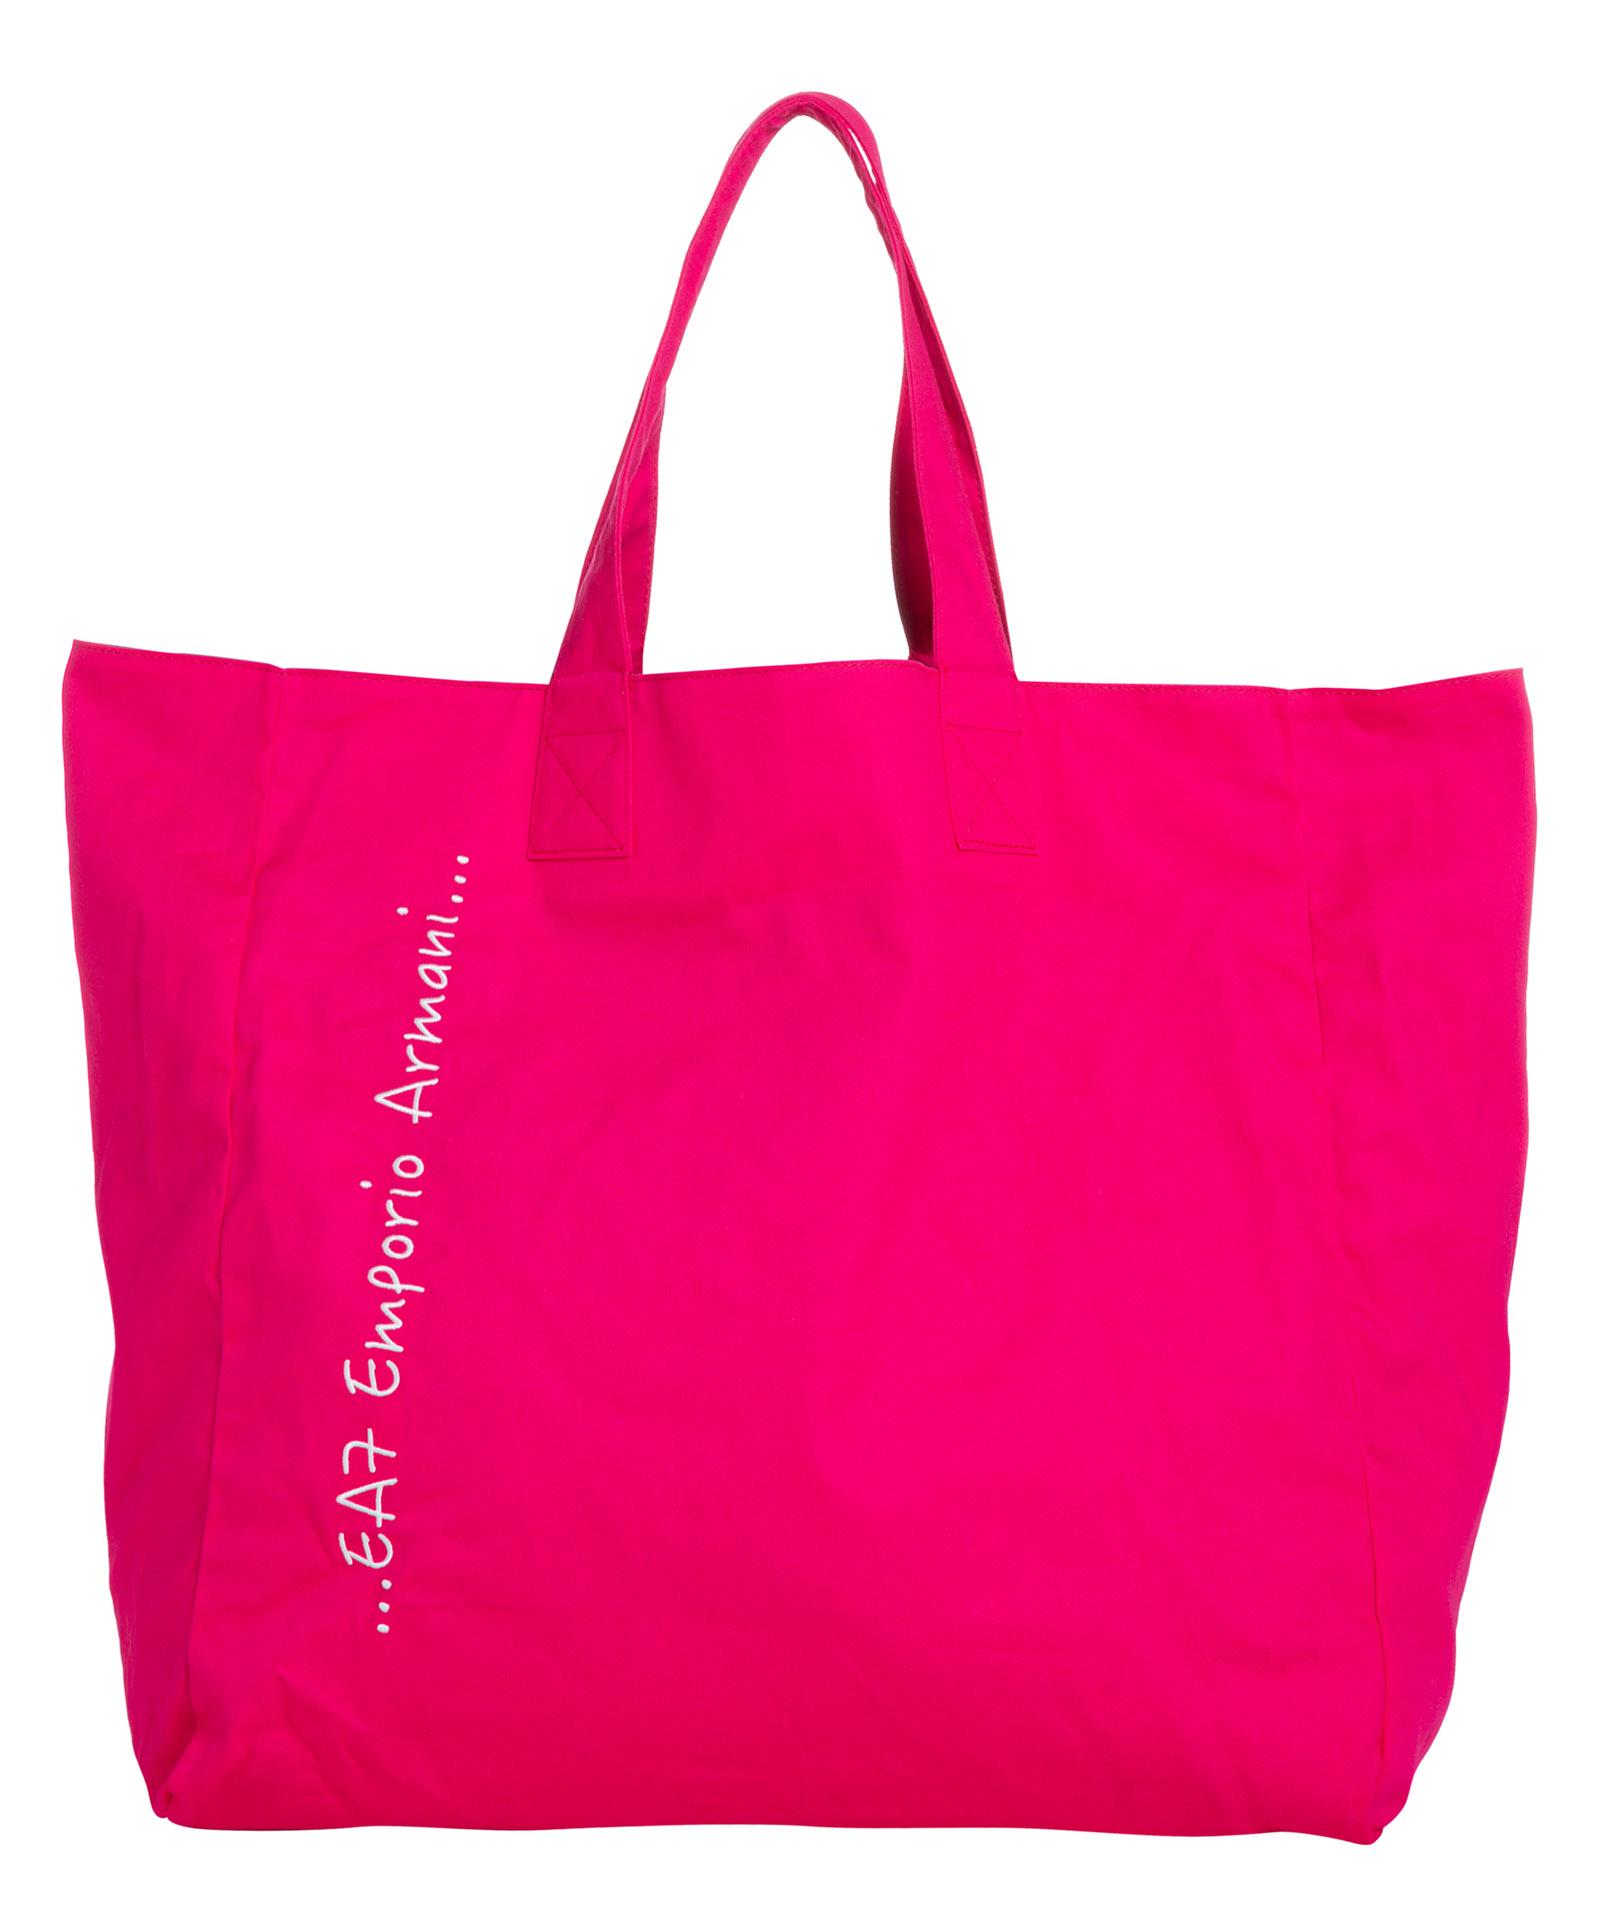 EA7 Cotton Tote Bag in Pink | Lyst